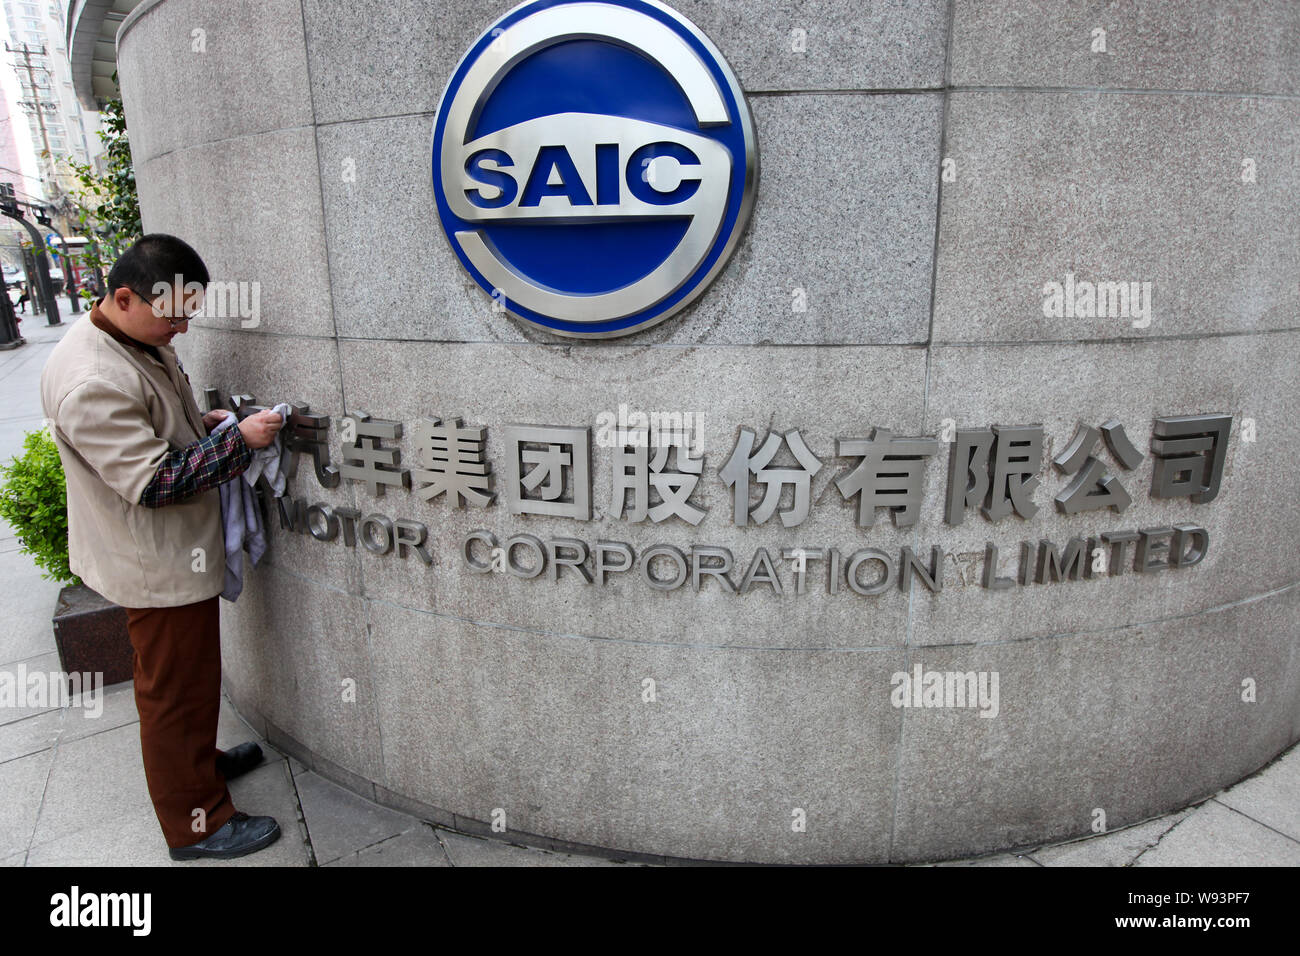 FILE--A Chinese worker dusts off the logo of SAIC Motor Corporation Limited  at the gate of the headquarters of SAIC Motor in Shanghai, China, 8 Apri  Stock Photo - Alamy